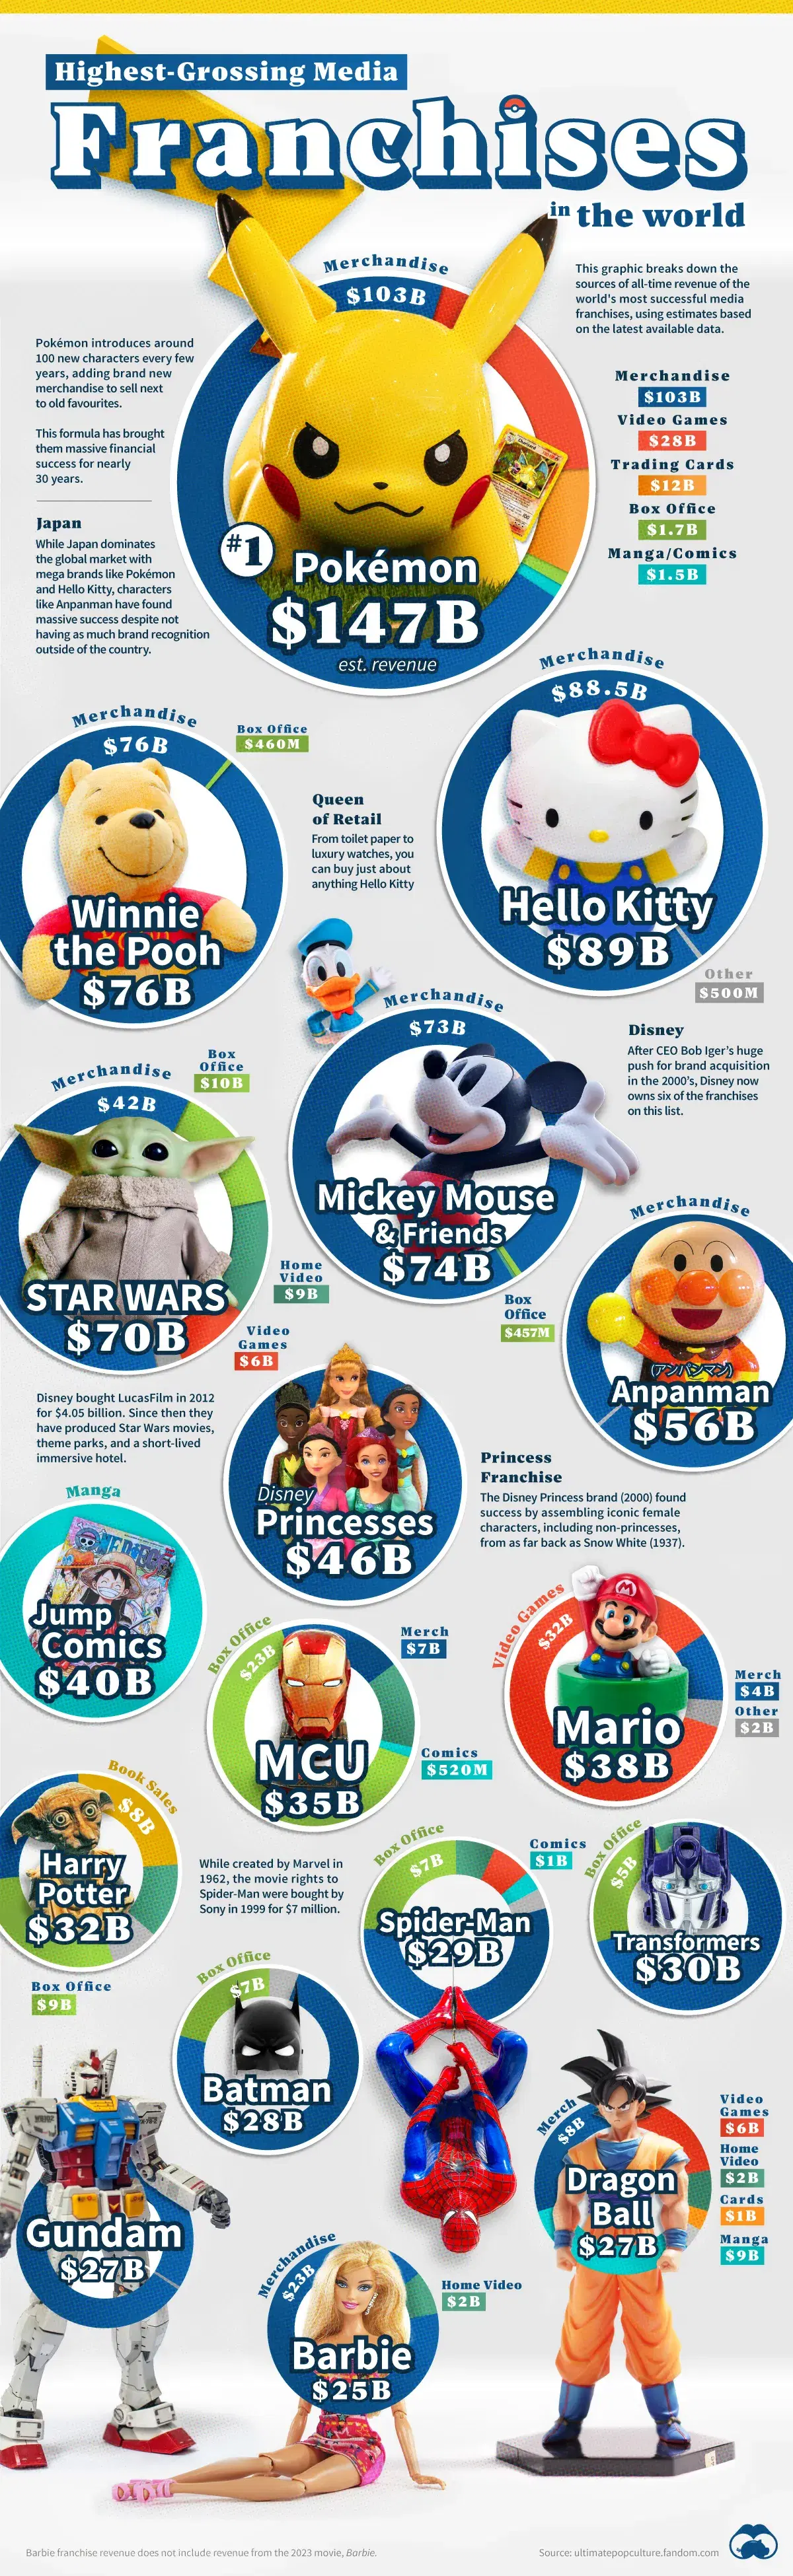 The World's Top Media Franchises by All-Time Revenue